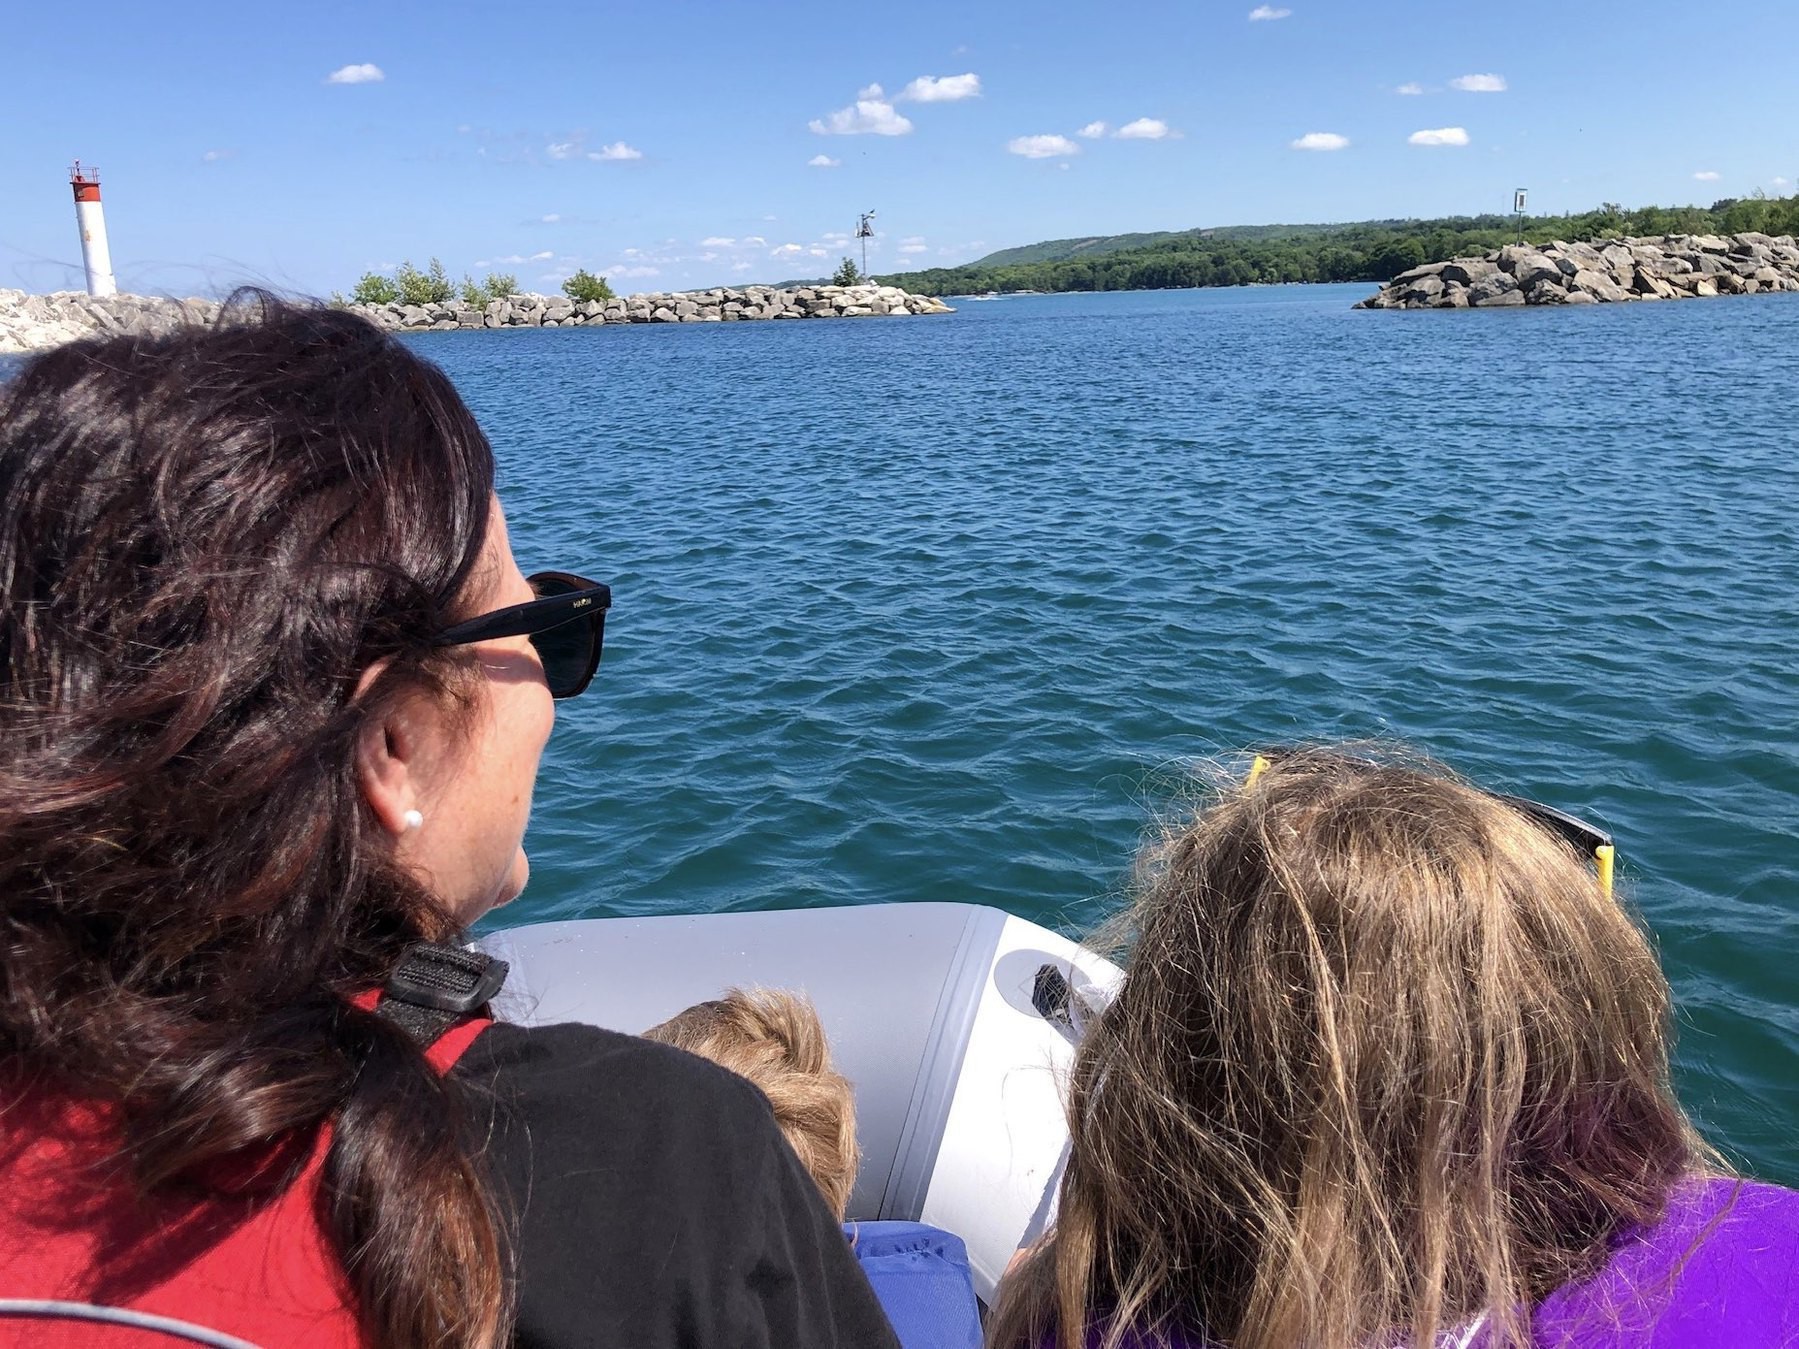 a woman and her two grandchildren wear lifejackets while riding in a small zodiak. Large rocks make a breakwall and trees are visible in the distance